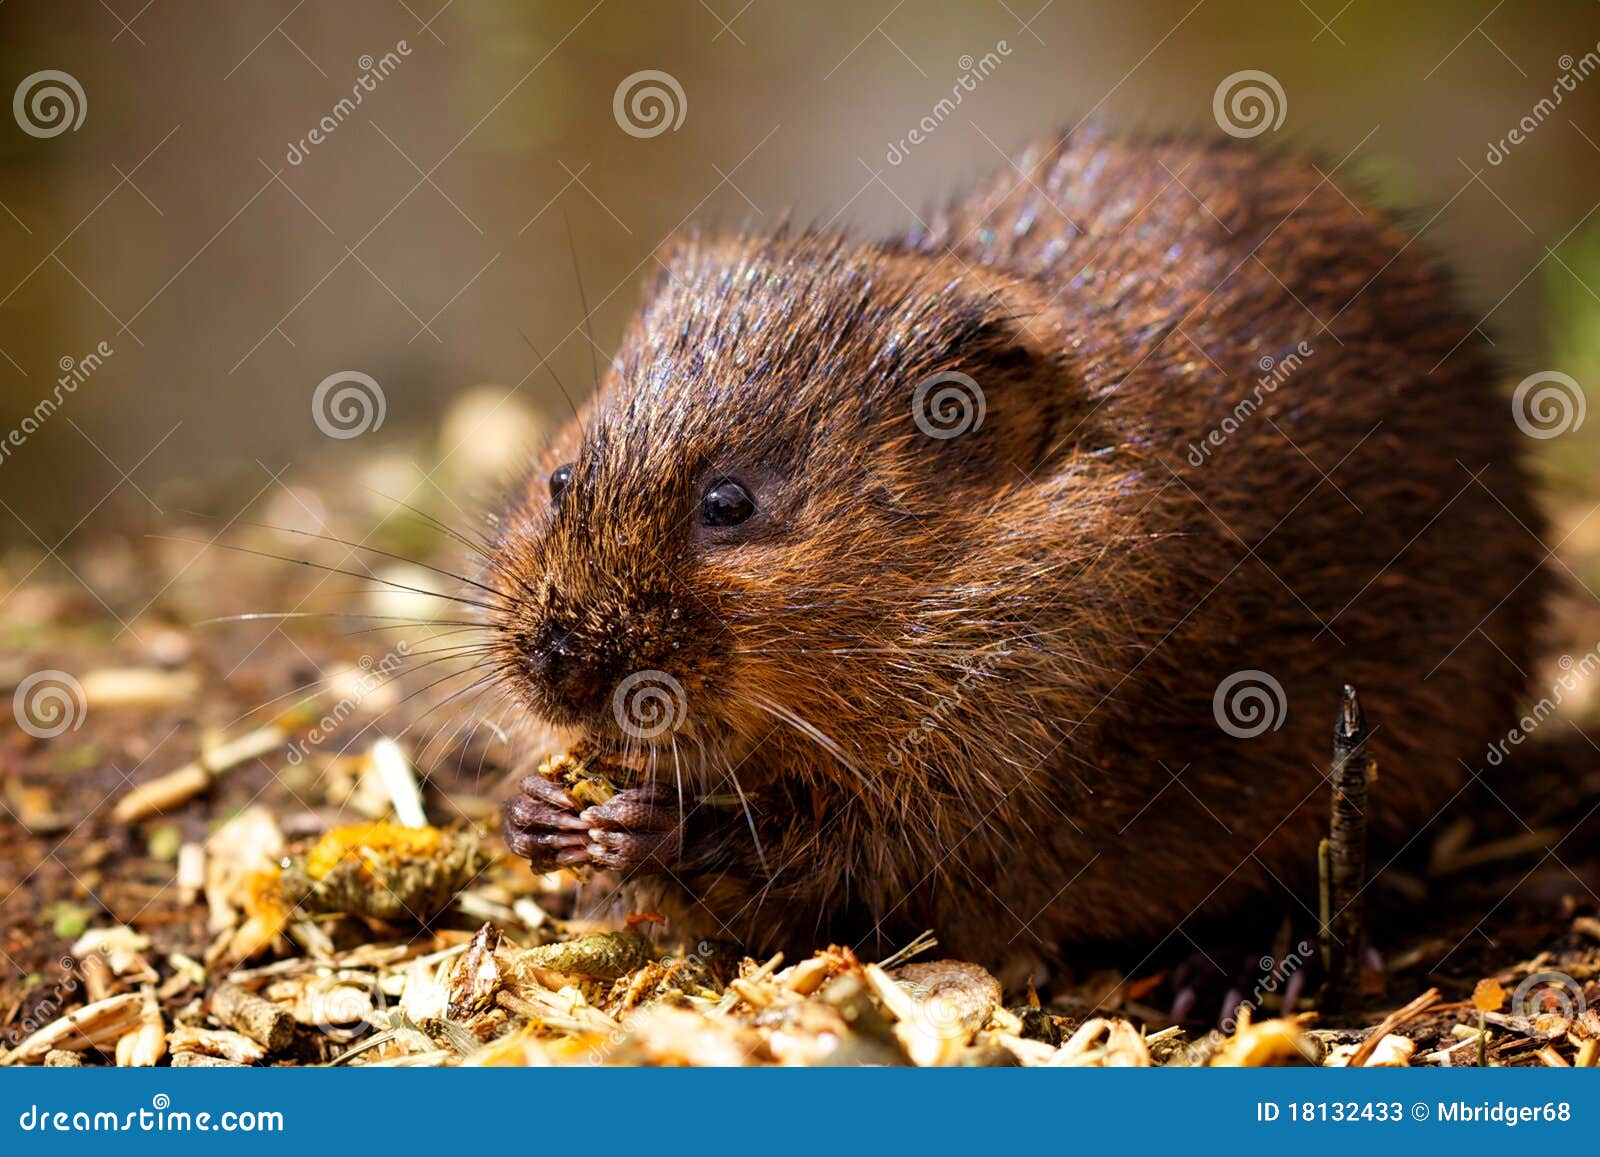 a water vole on a bank